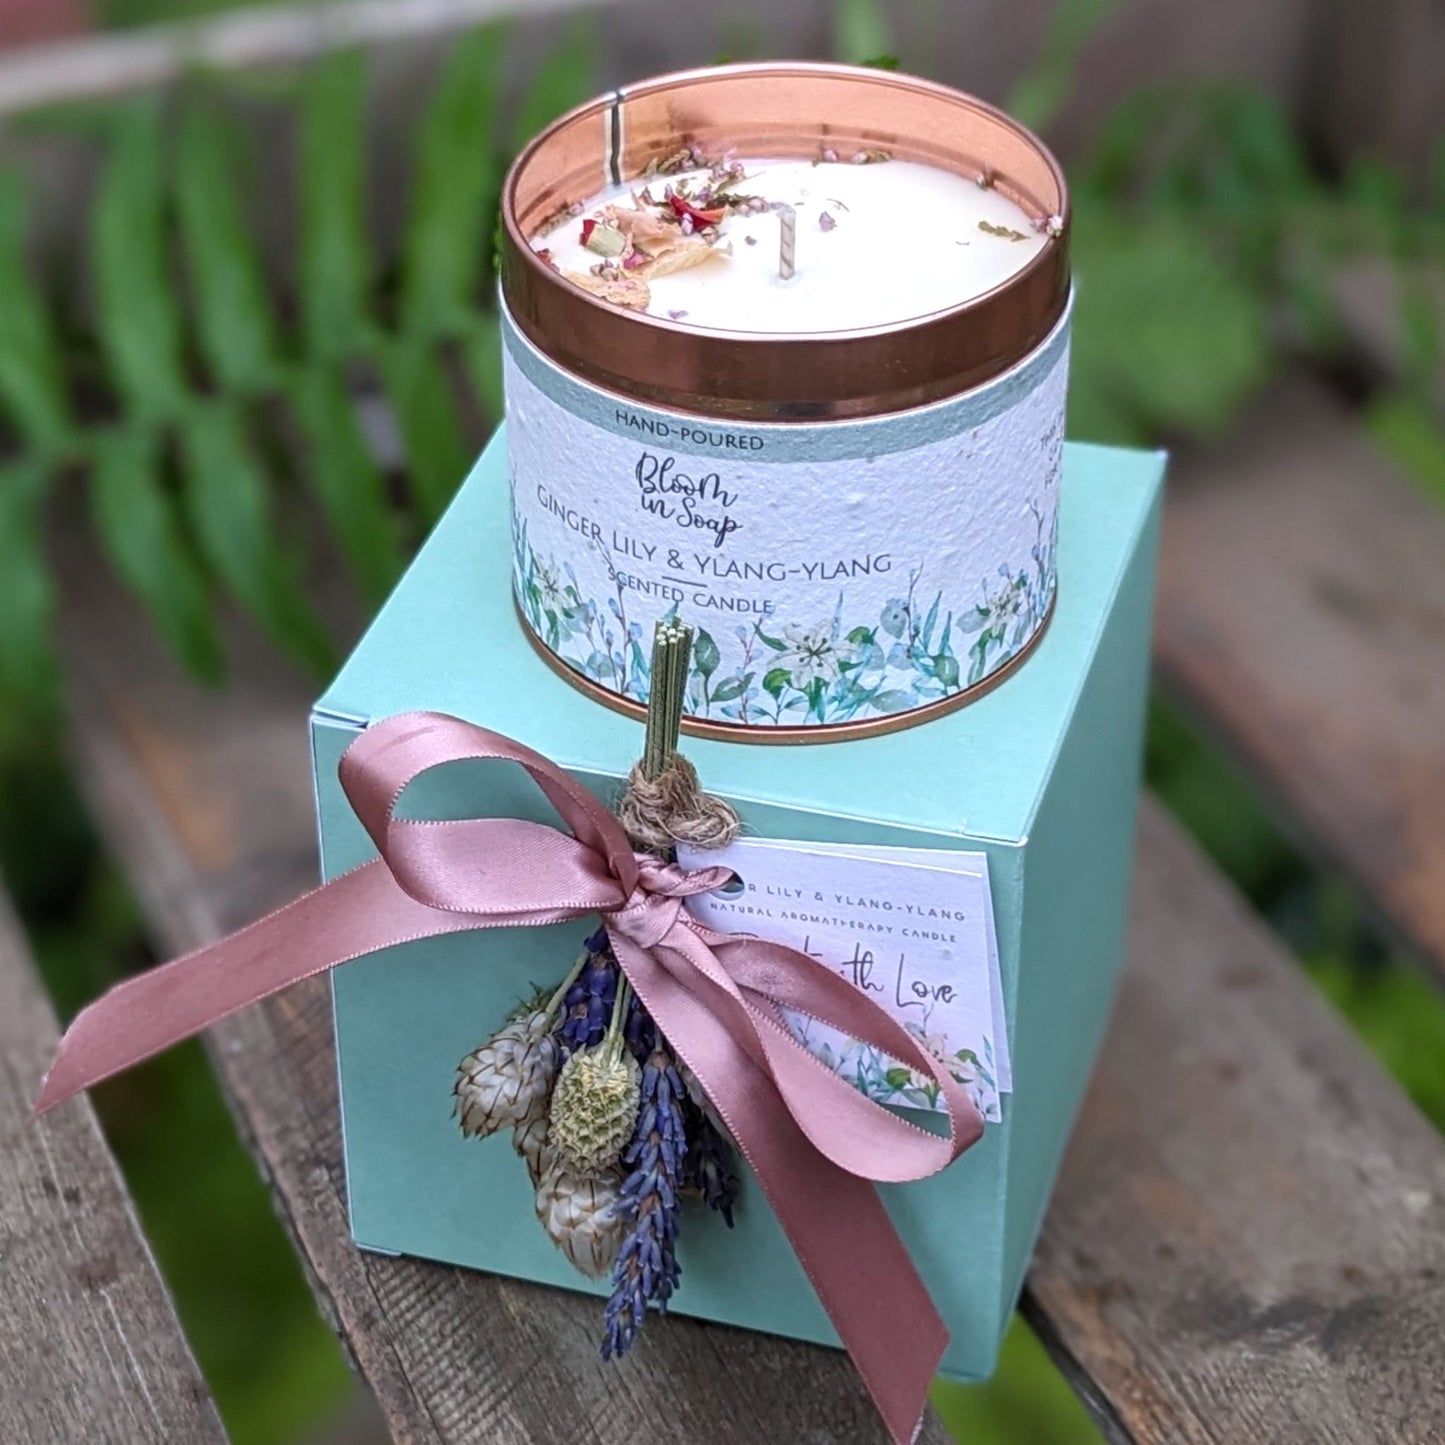 Ginger lily aromatherapy candle in a gift box